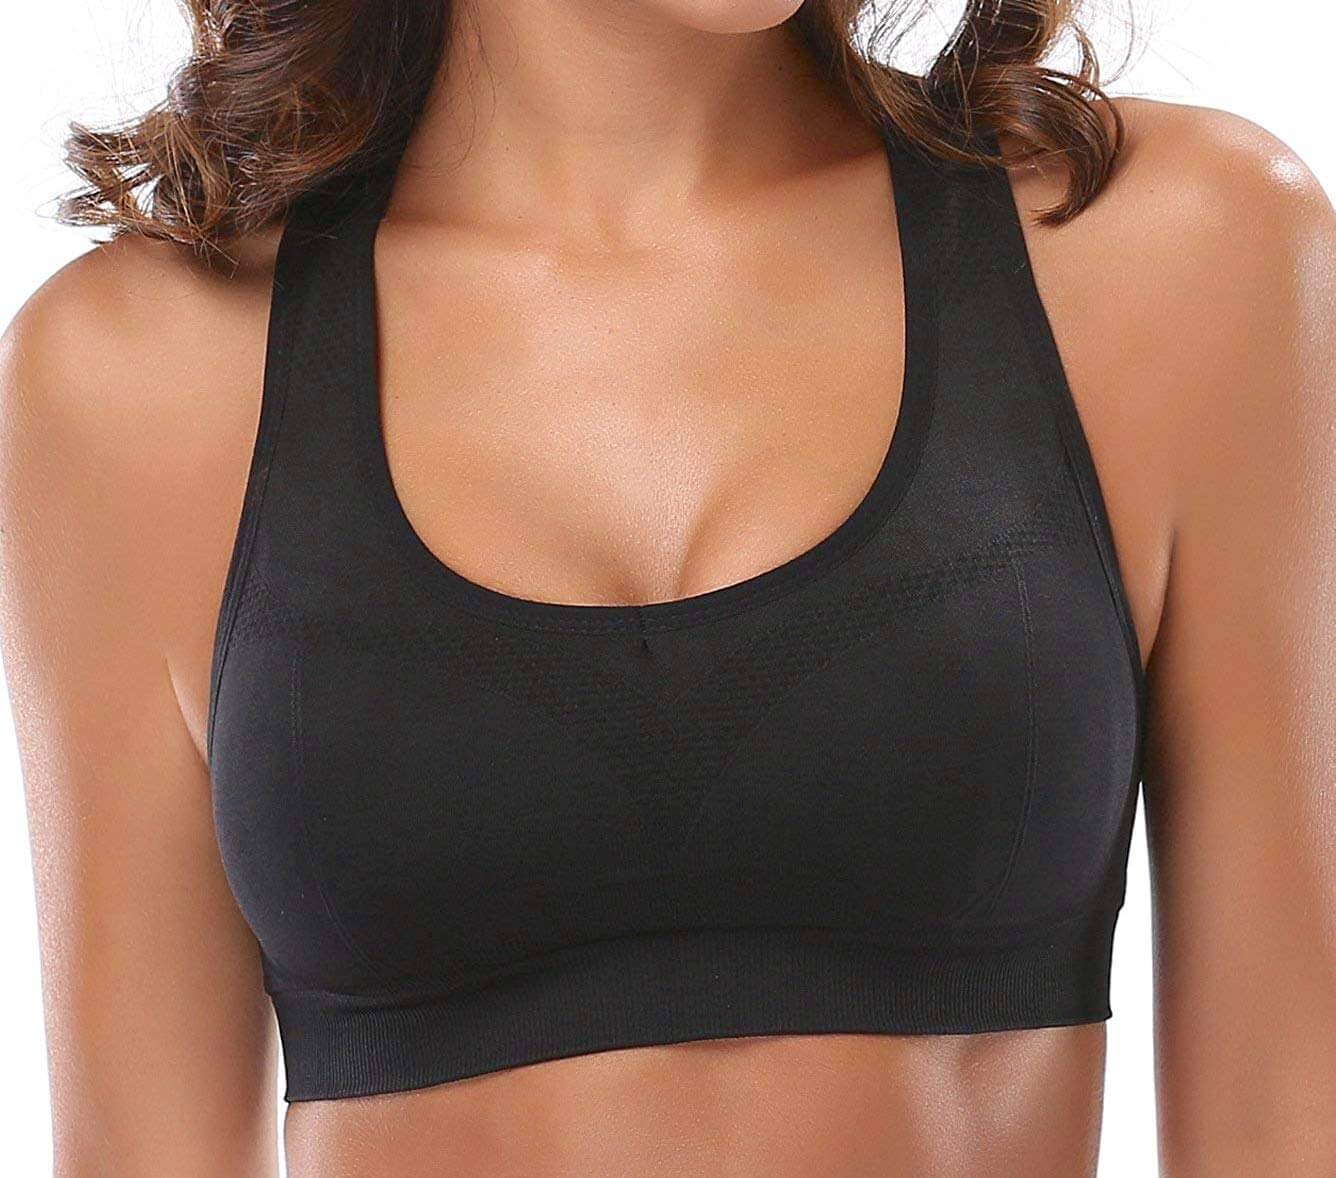  Match Womens Sports Bra Wirefree Seamless Padded Racerback  Yoga Bra For Workout Gym Activewear